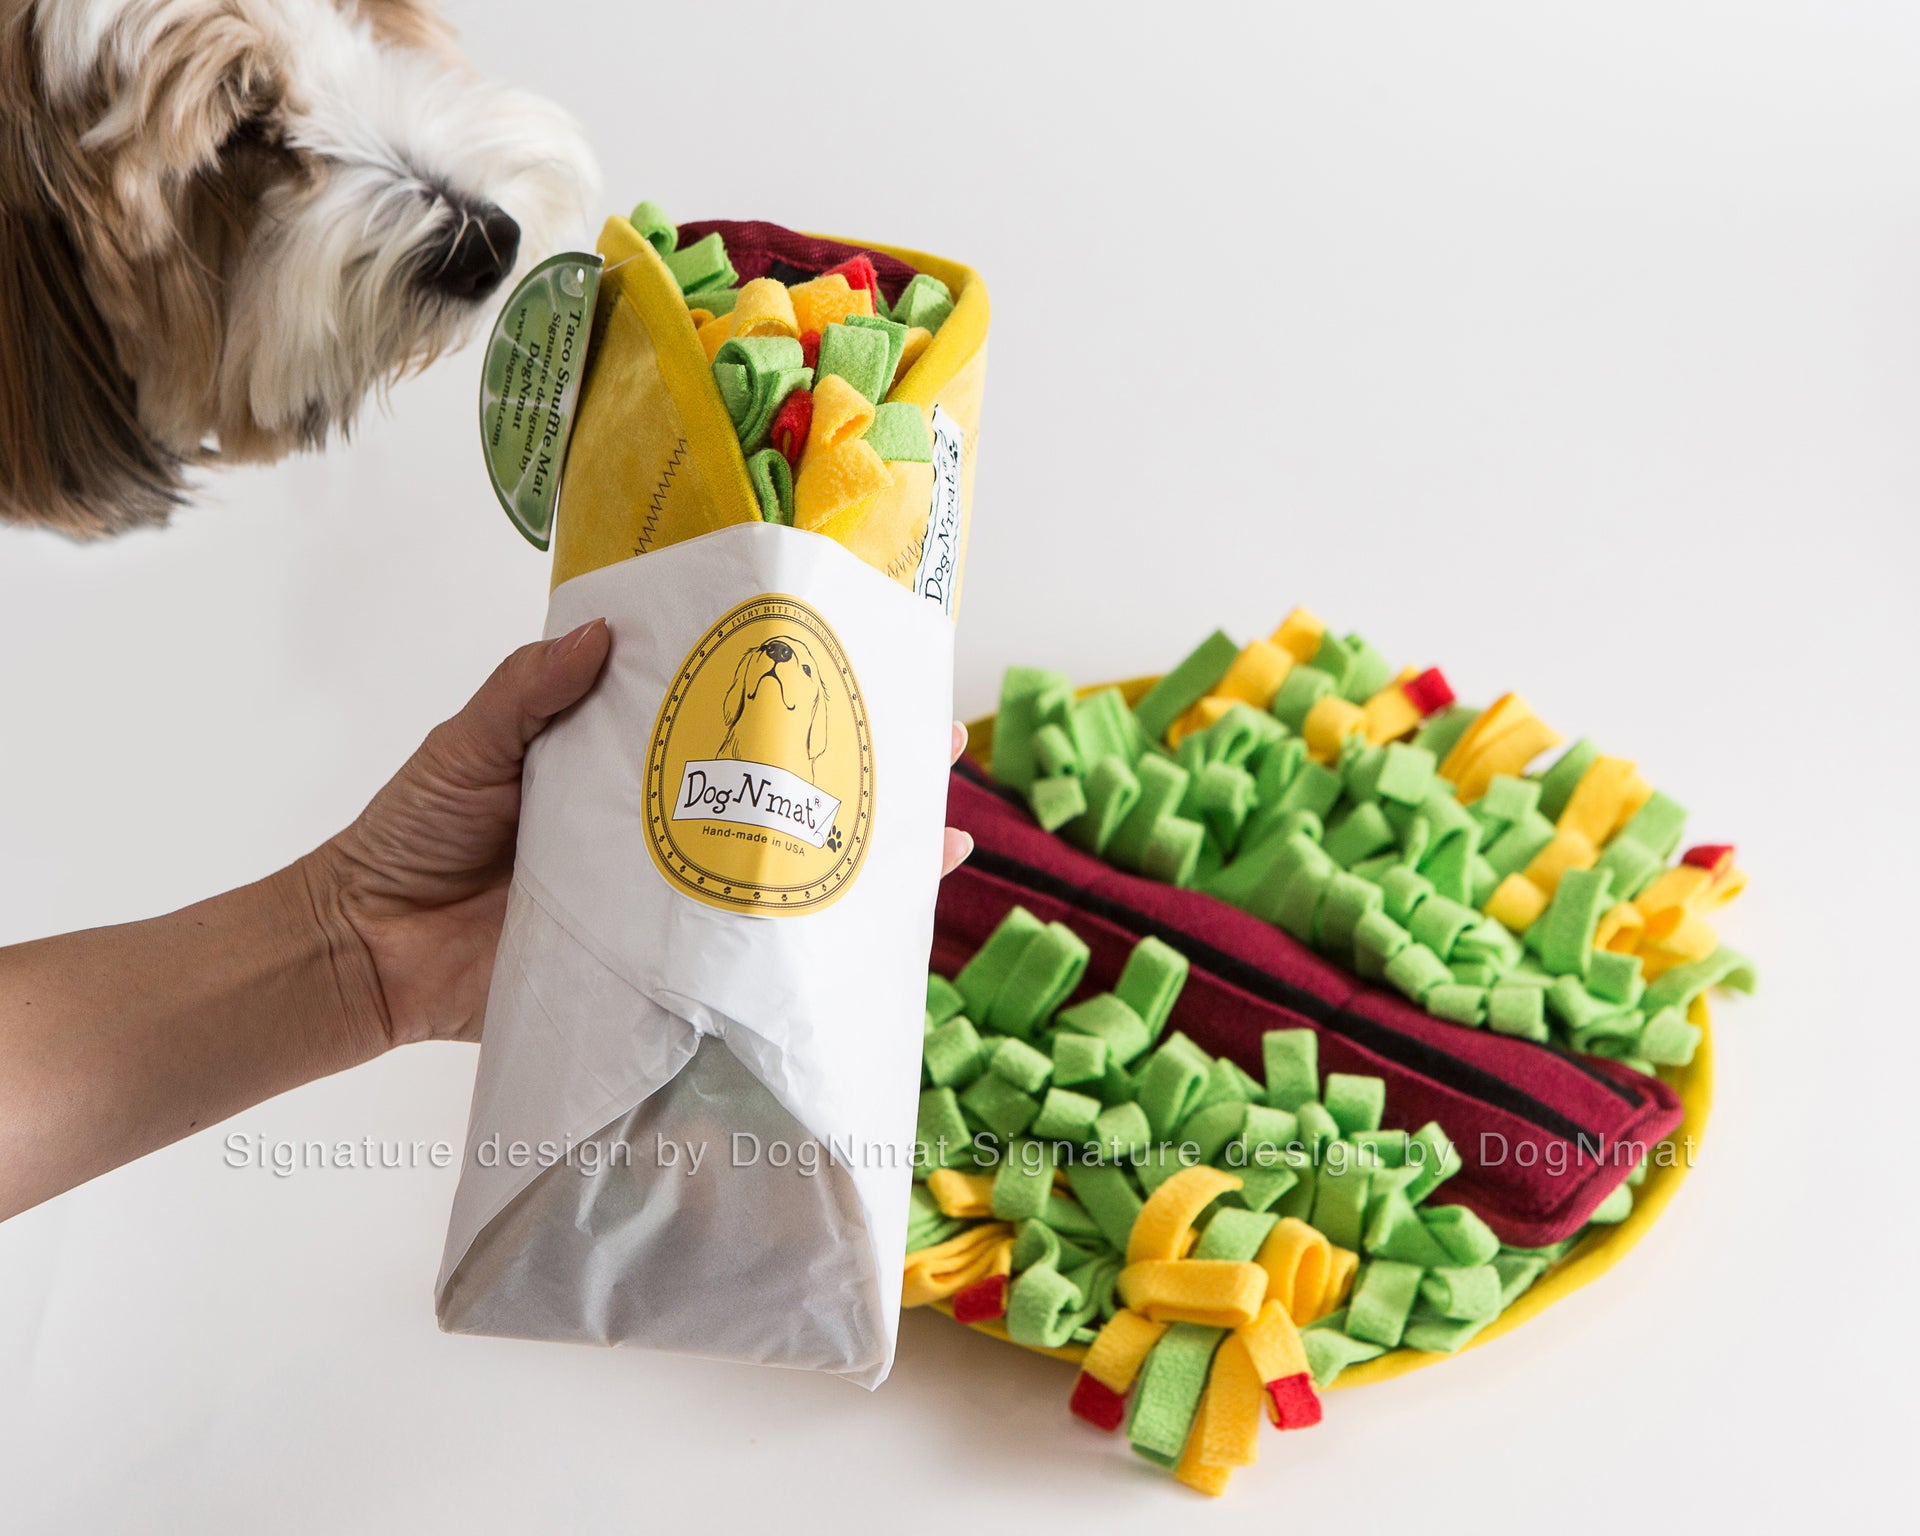 DogNmat Halloween Snuffle Activity Mat – Store For The Dogs